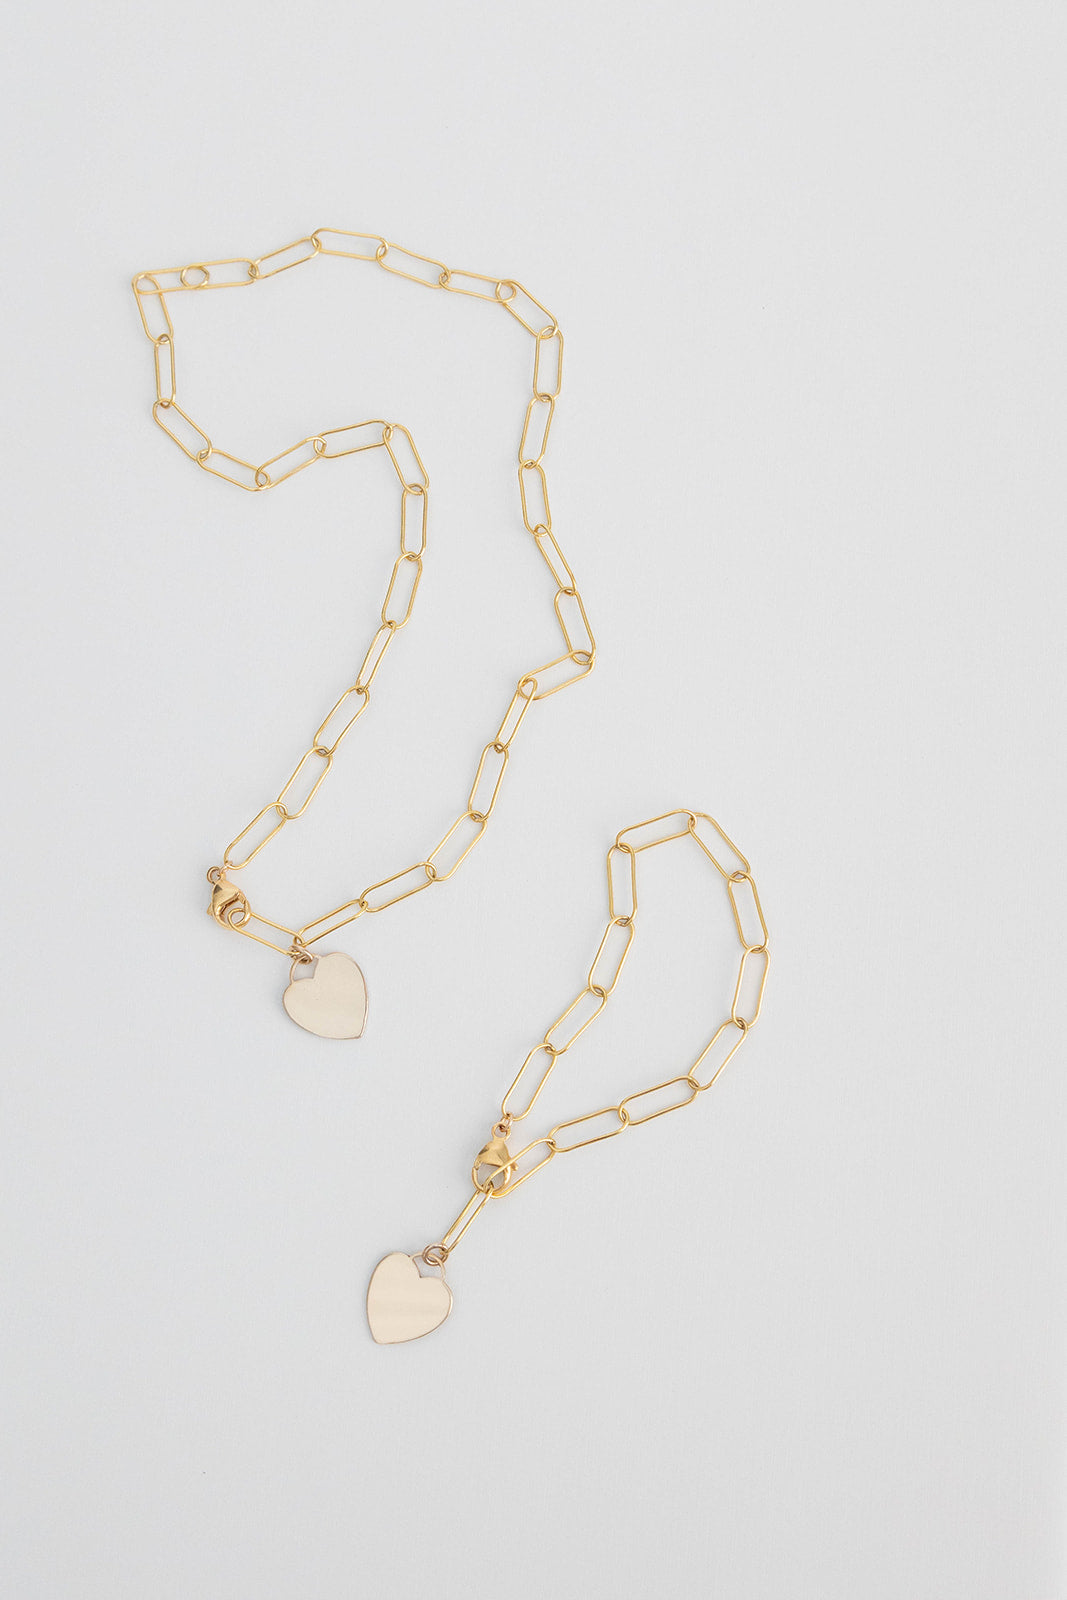 A 7 inch 14k gold filled paper clip chain bracelet with heart tag lays on a white background with a matching necklace.